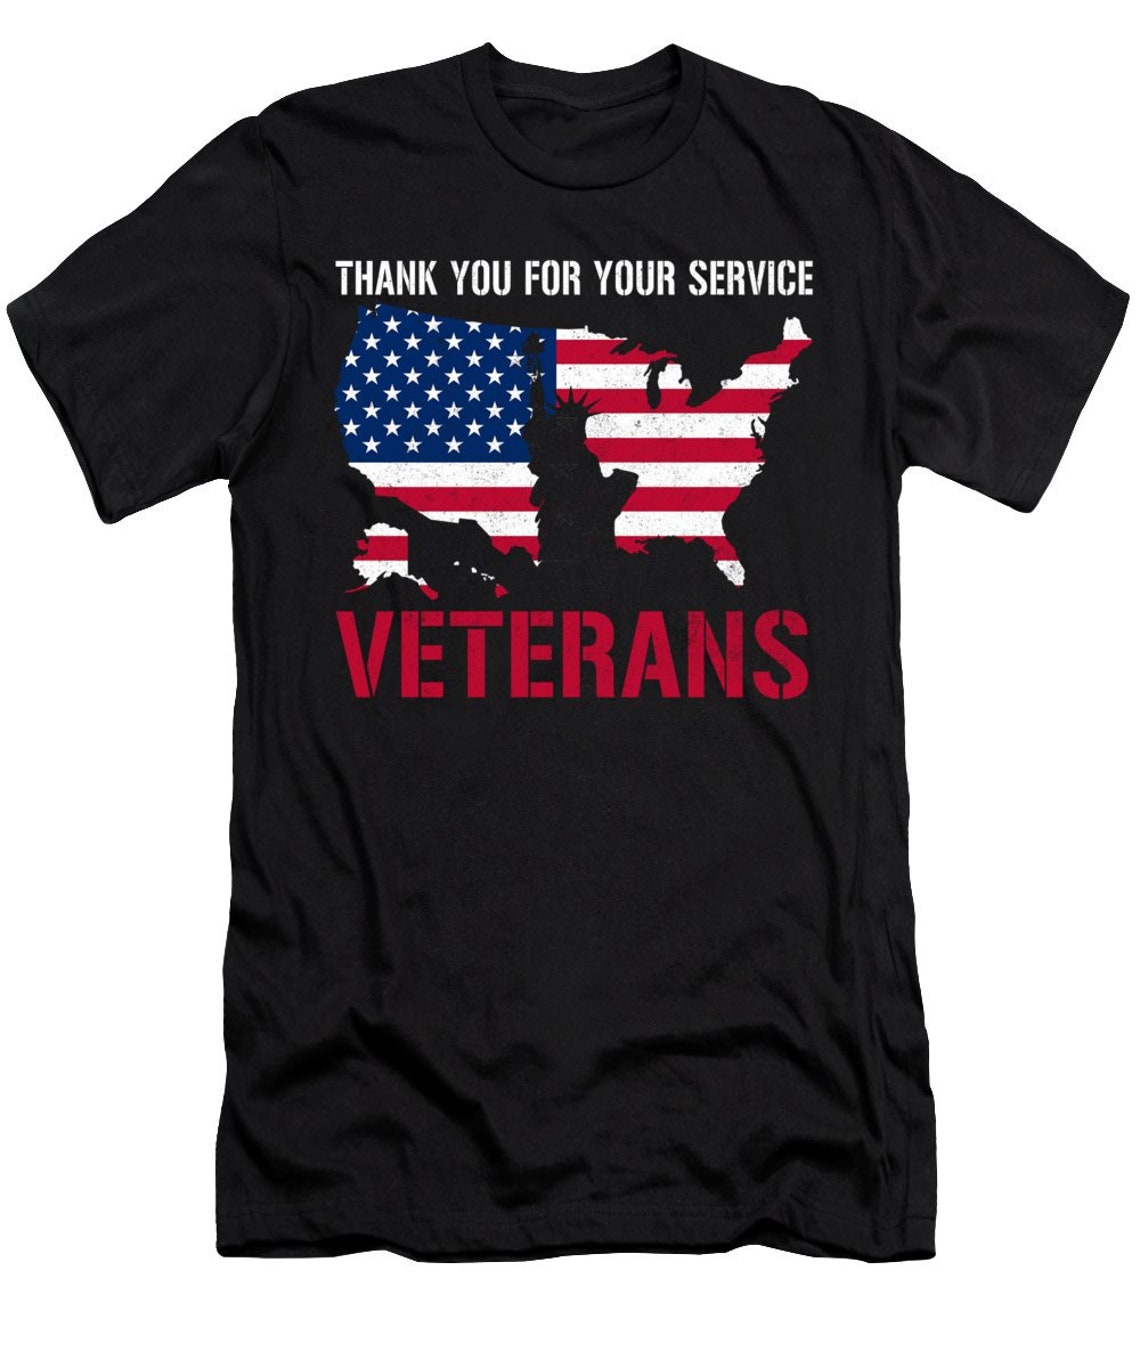 Thank You for your Service Veterans T-Shirt gift for you in my | Etsy